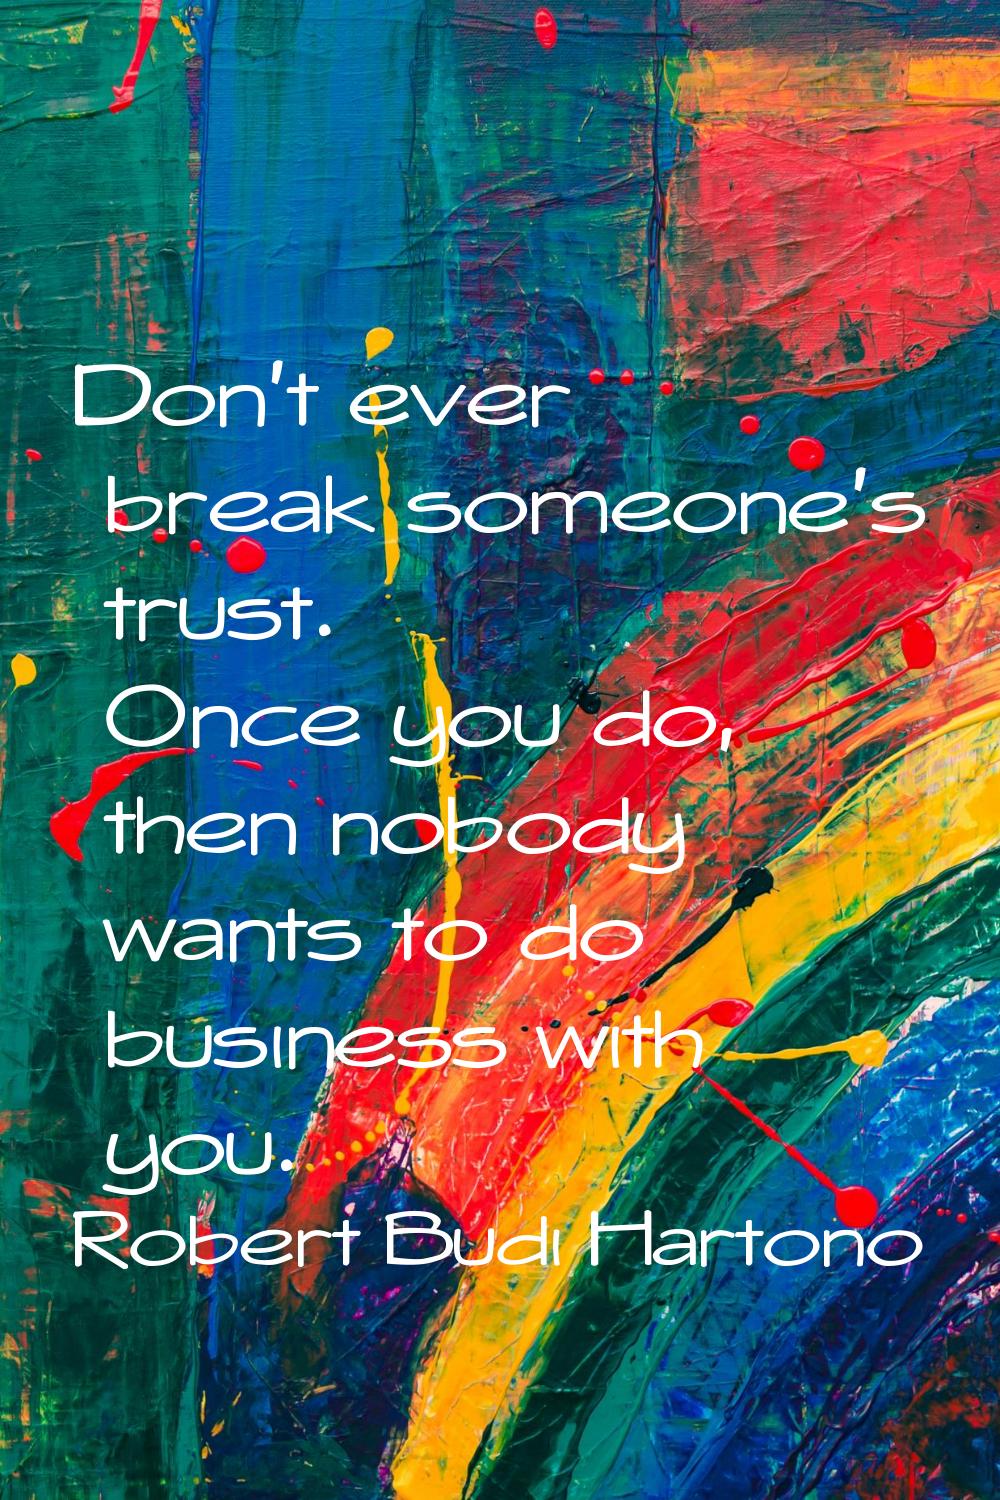 Don't ever break someone's trust. Once you do, then nobody wants to do business with you.